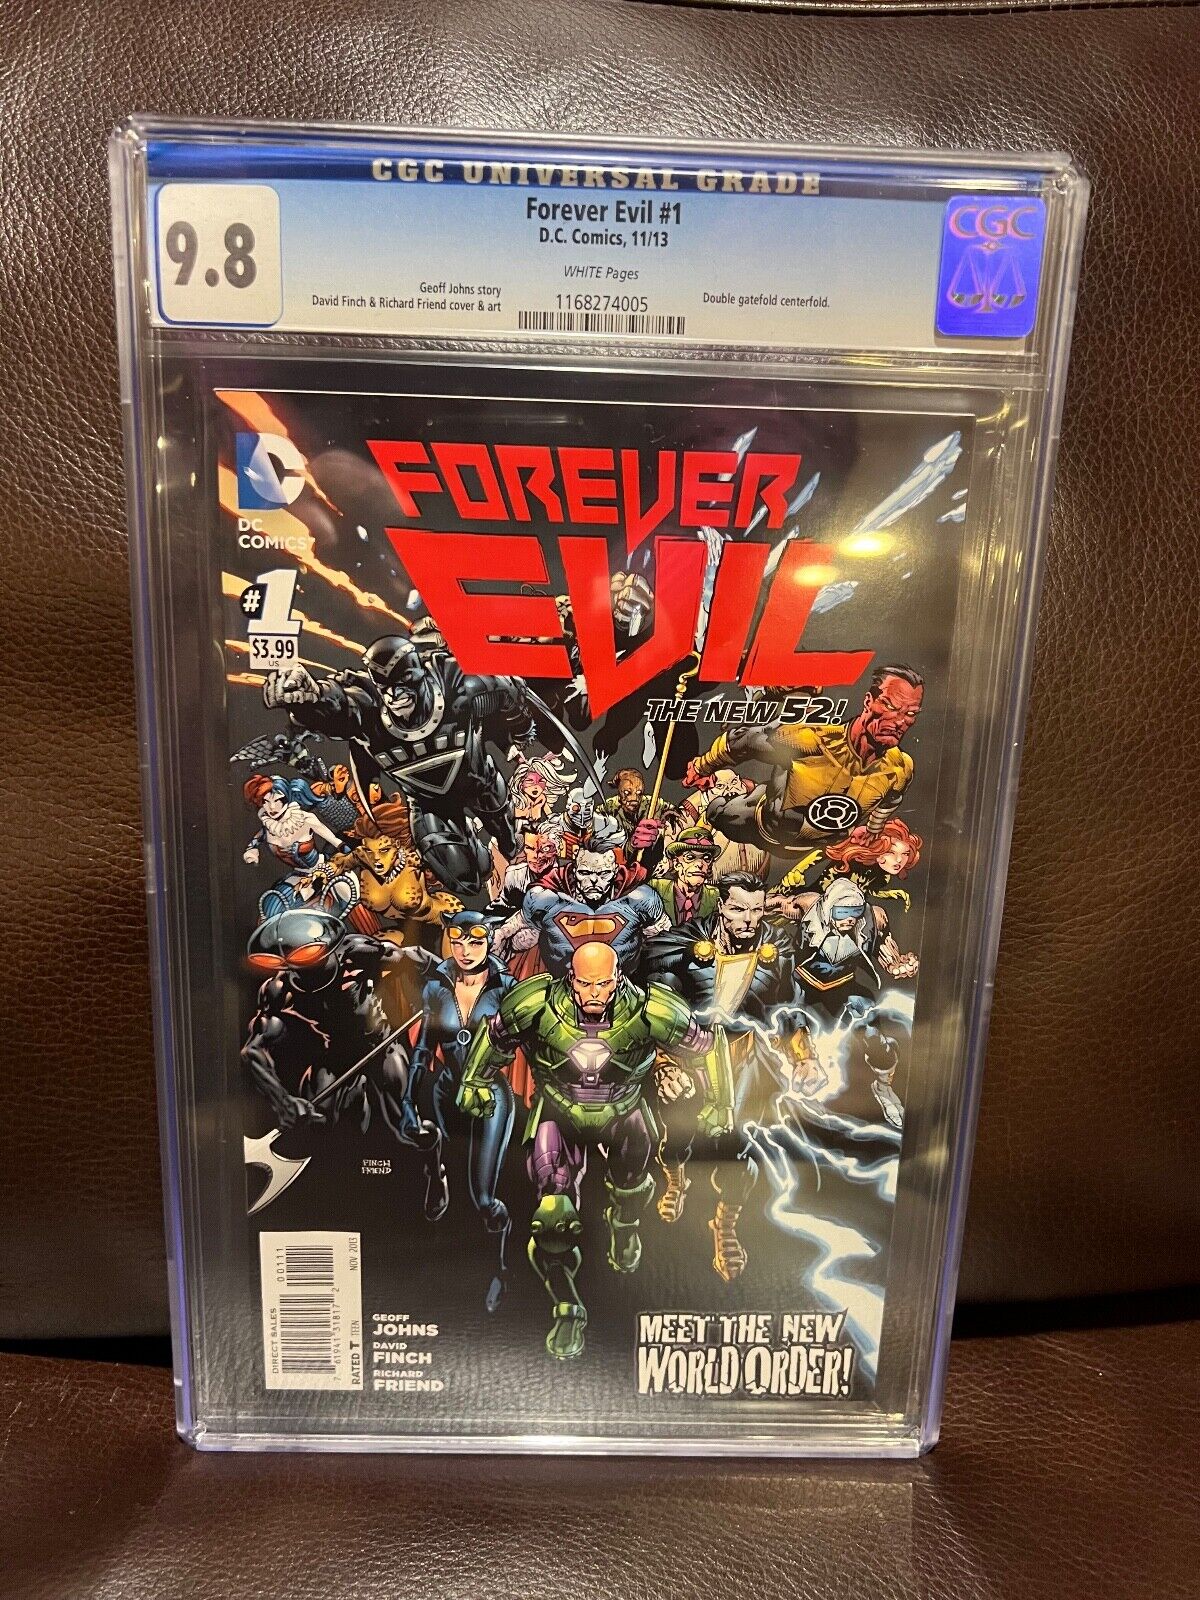 FOREVER EVIL #1 - CERTIFIED CGC 9.8, DC COMICS FIRST PRINT SOLD OUT ISSUE - LOOK